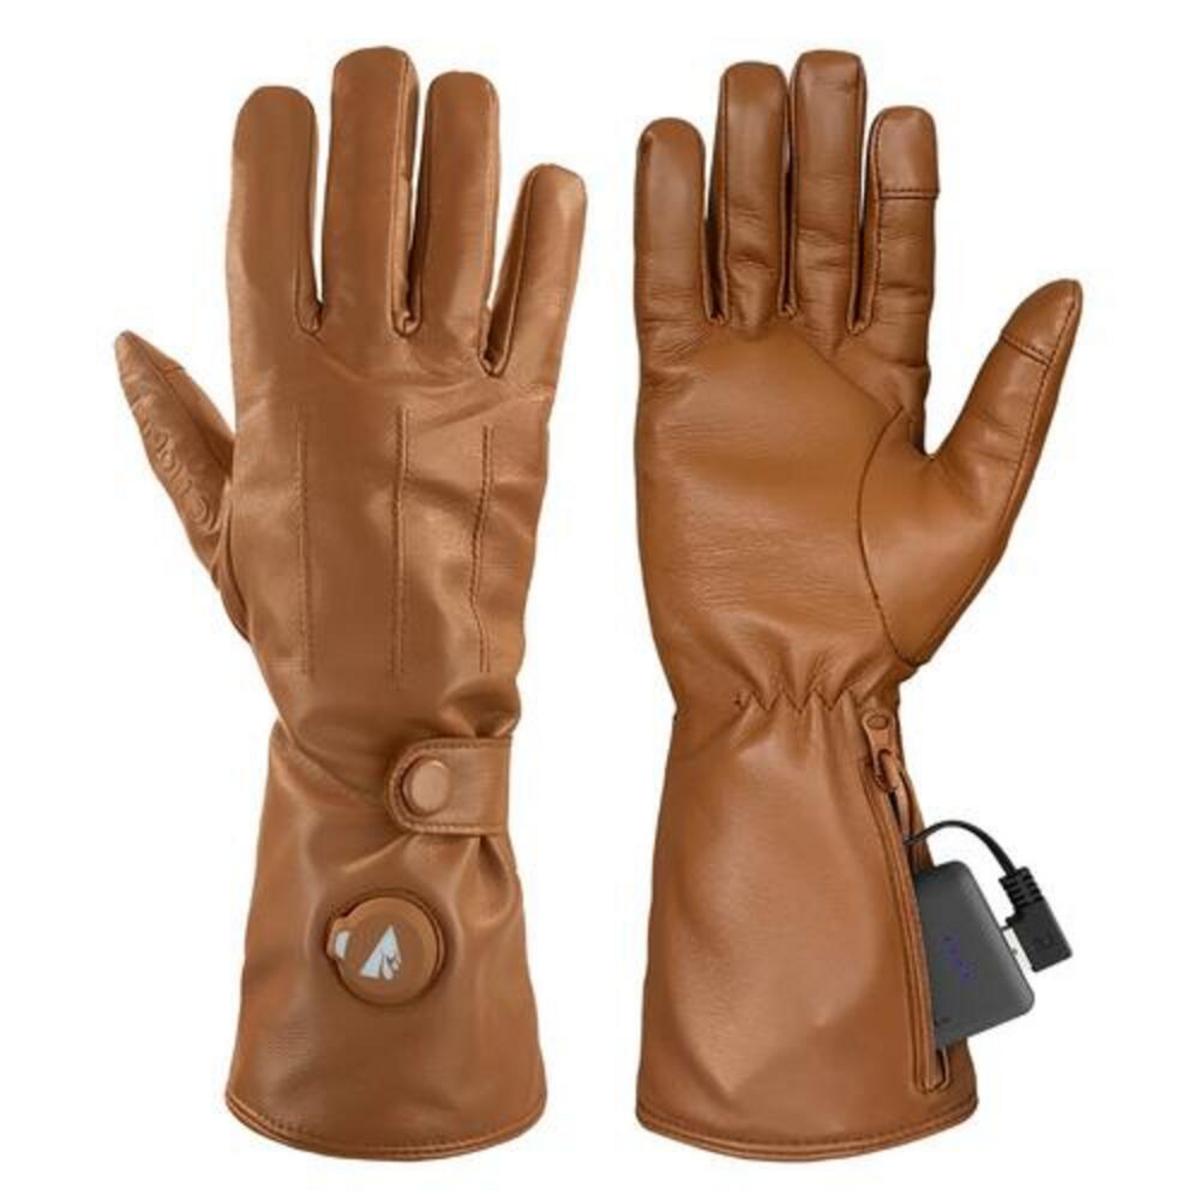 Open Box ActionHeat 5V Men's Battery Heated Leather Dress Glove - Heated